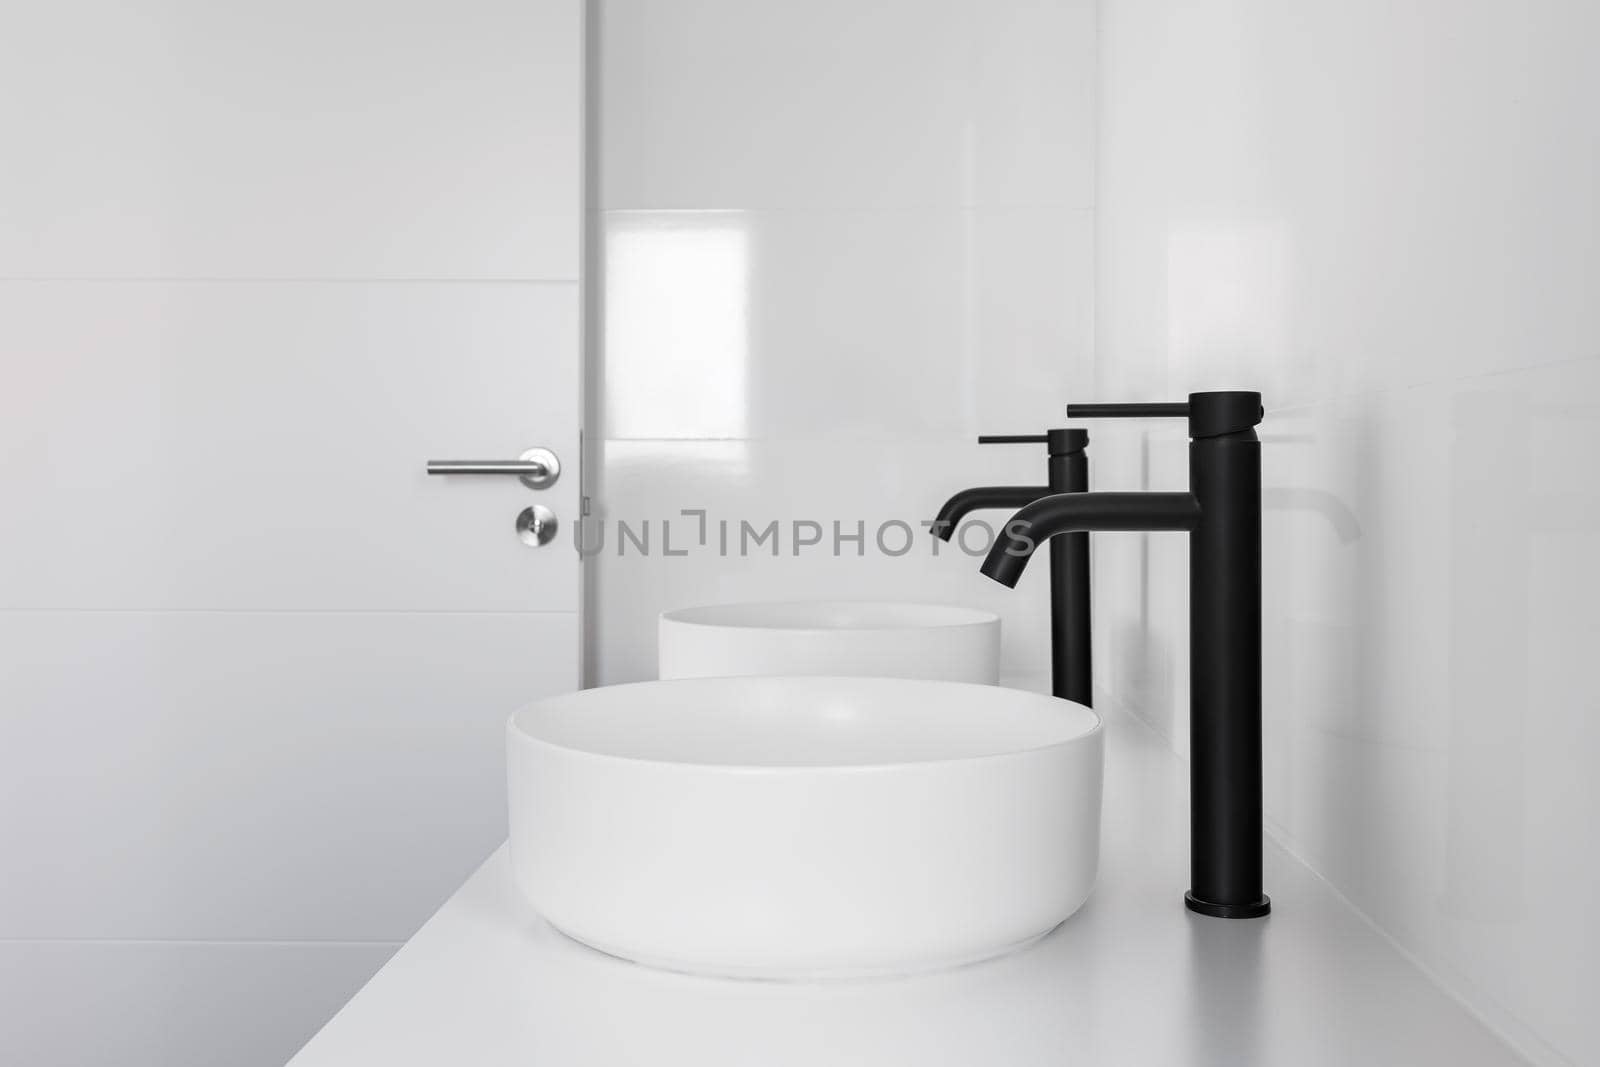 White tiled bathroom with two wash basins and black faucets by apavlin